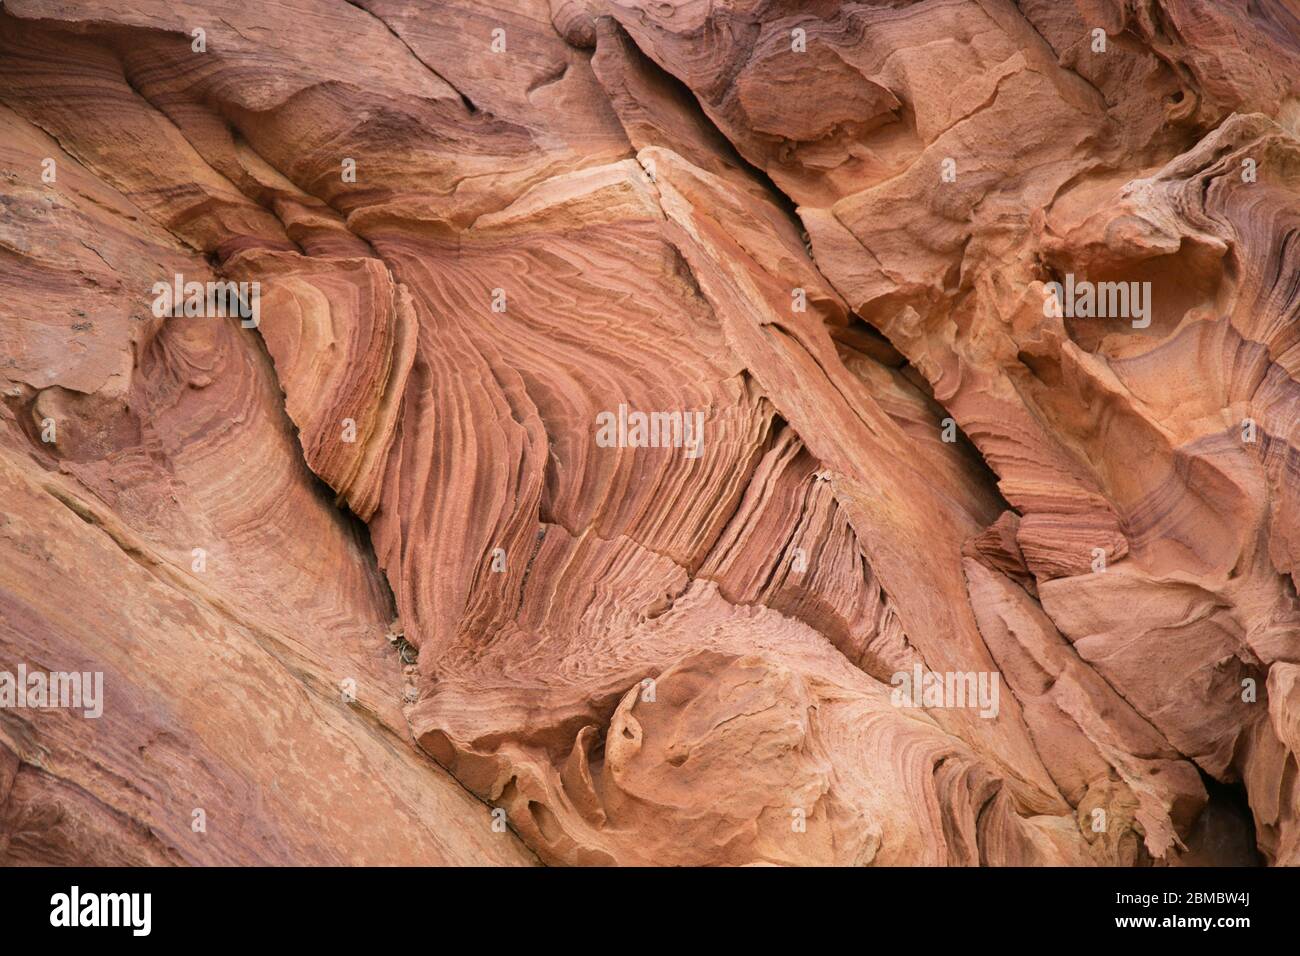 Fantastical sandstone layers in Coyote Buttes, Vermillion Cliffs Stock Photo